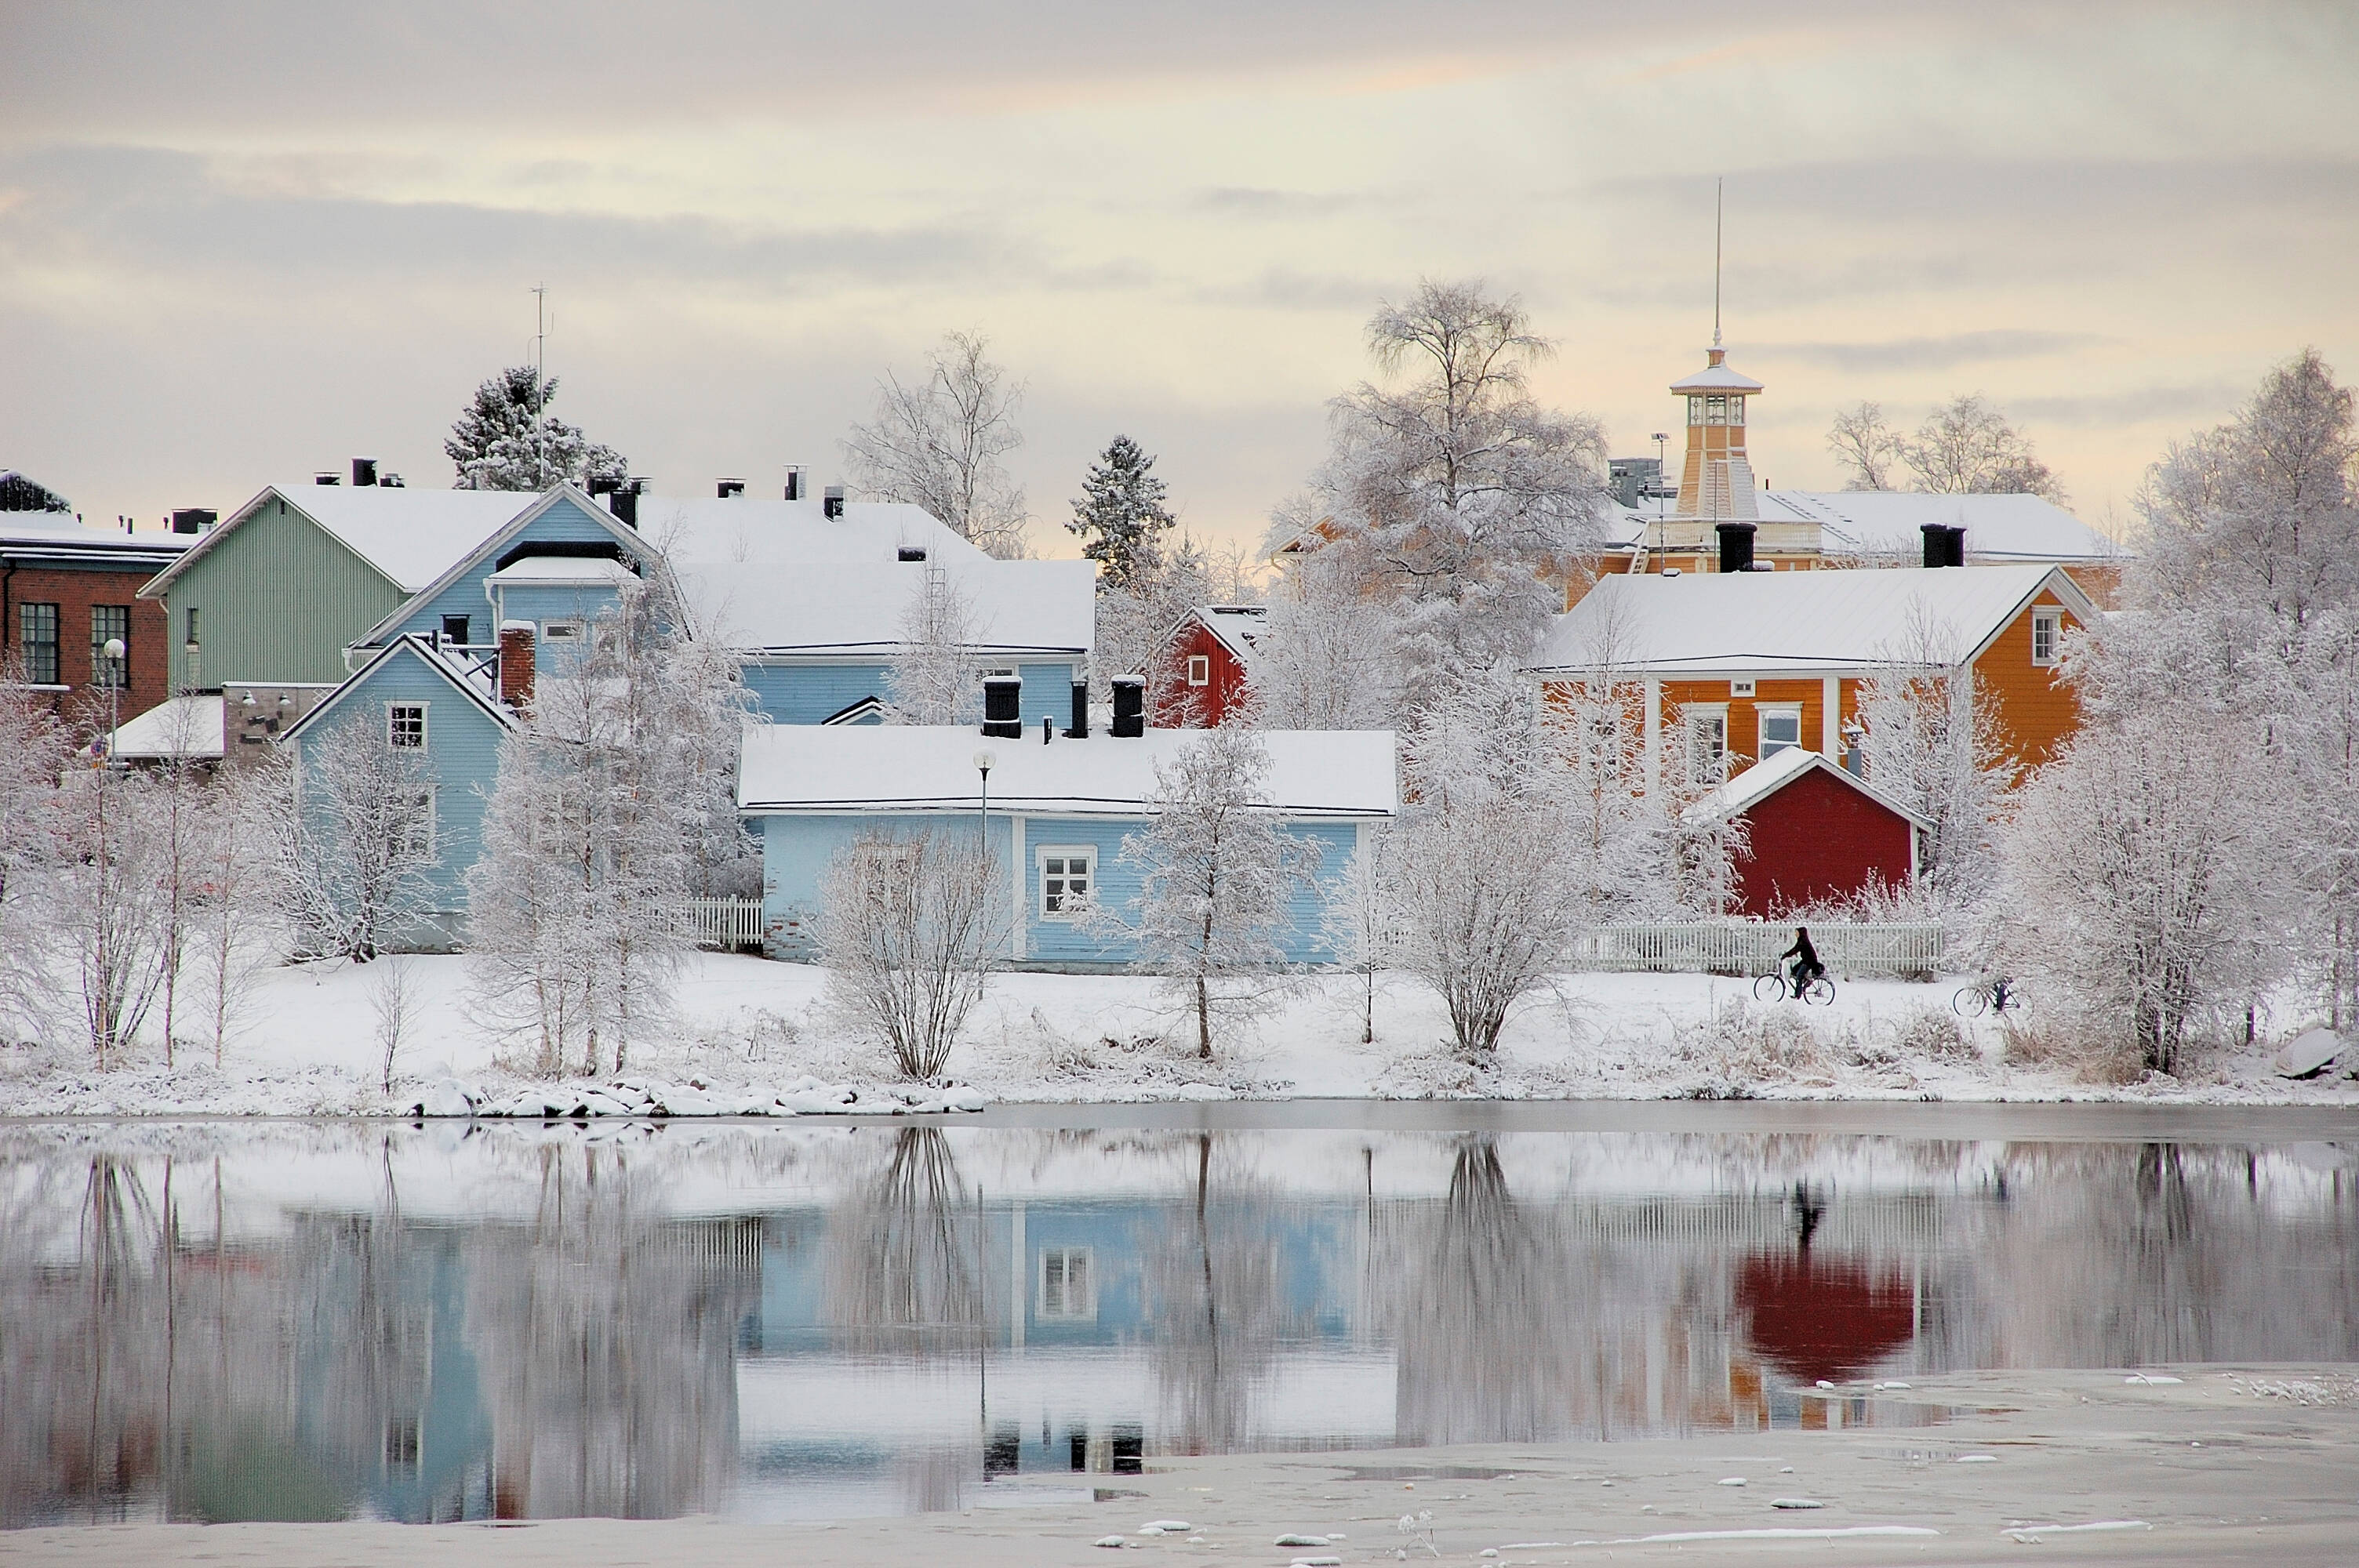 Colourful wooden houses by the Baltic sea in Oulu.